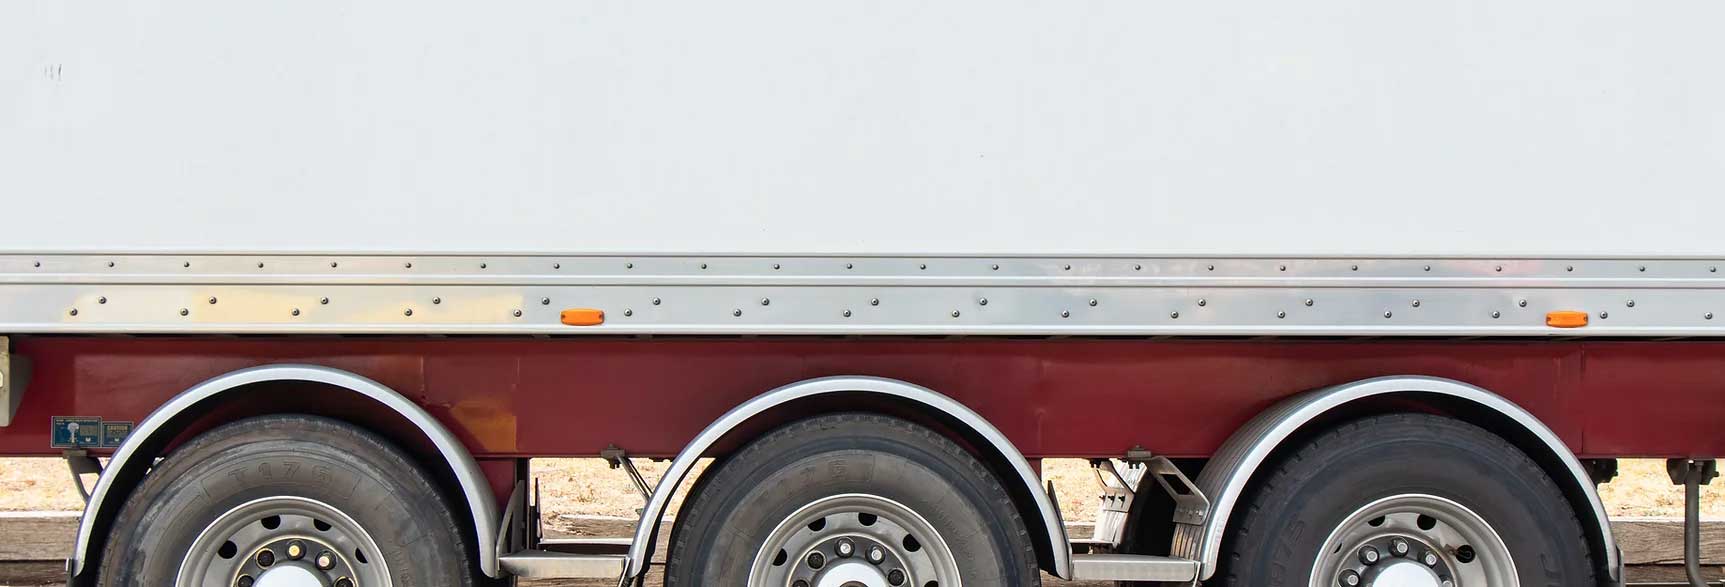 Chris Buckley Transport truck trailer side with wheels